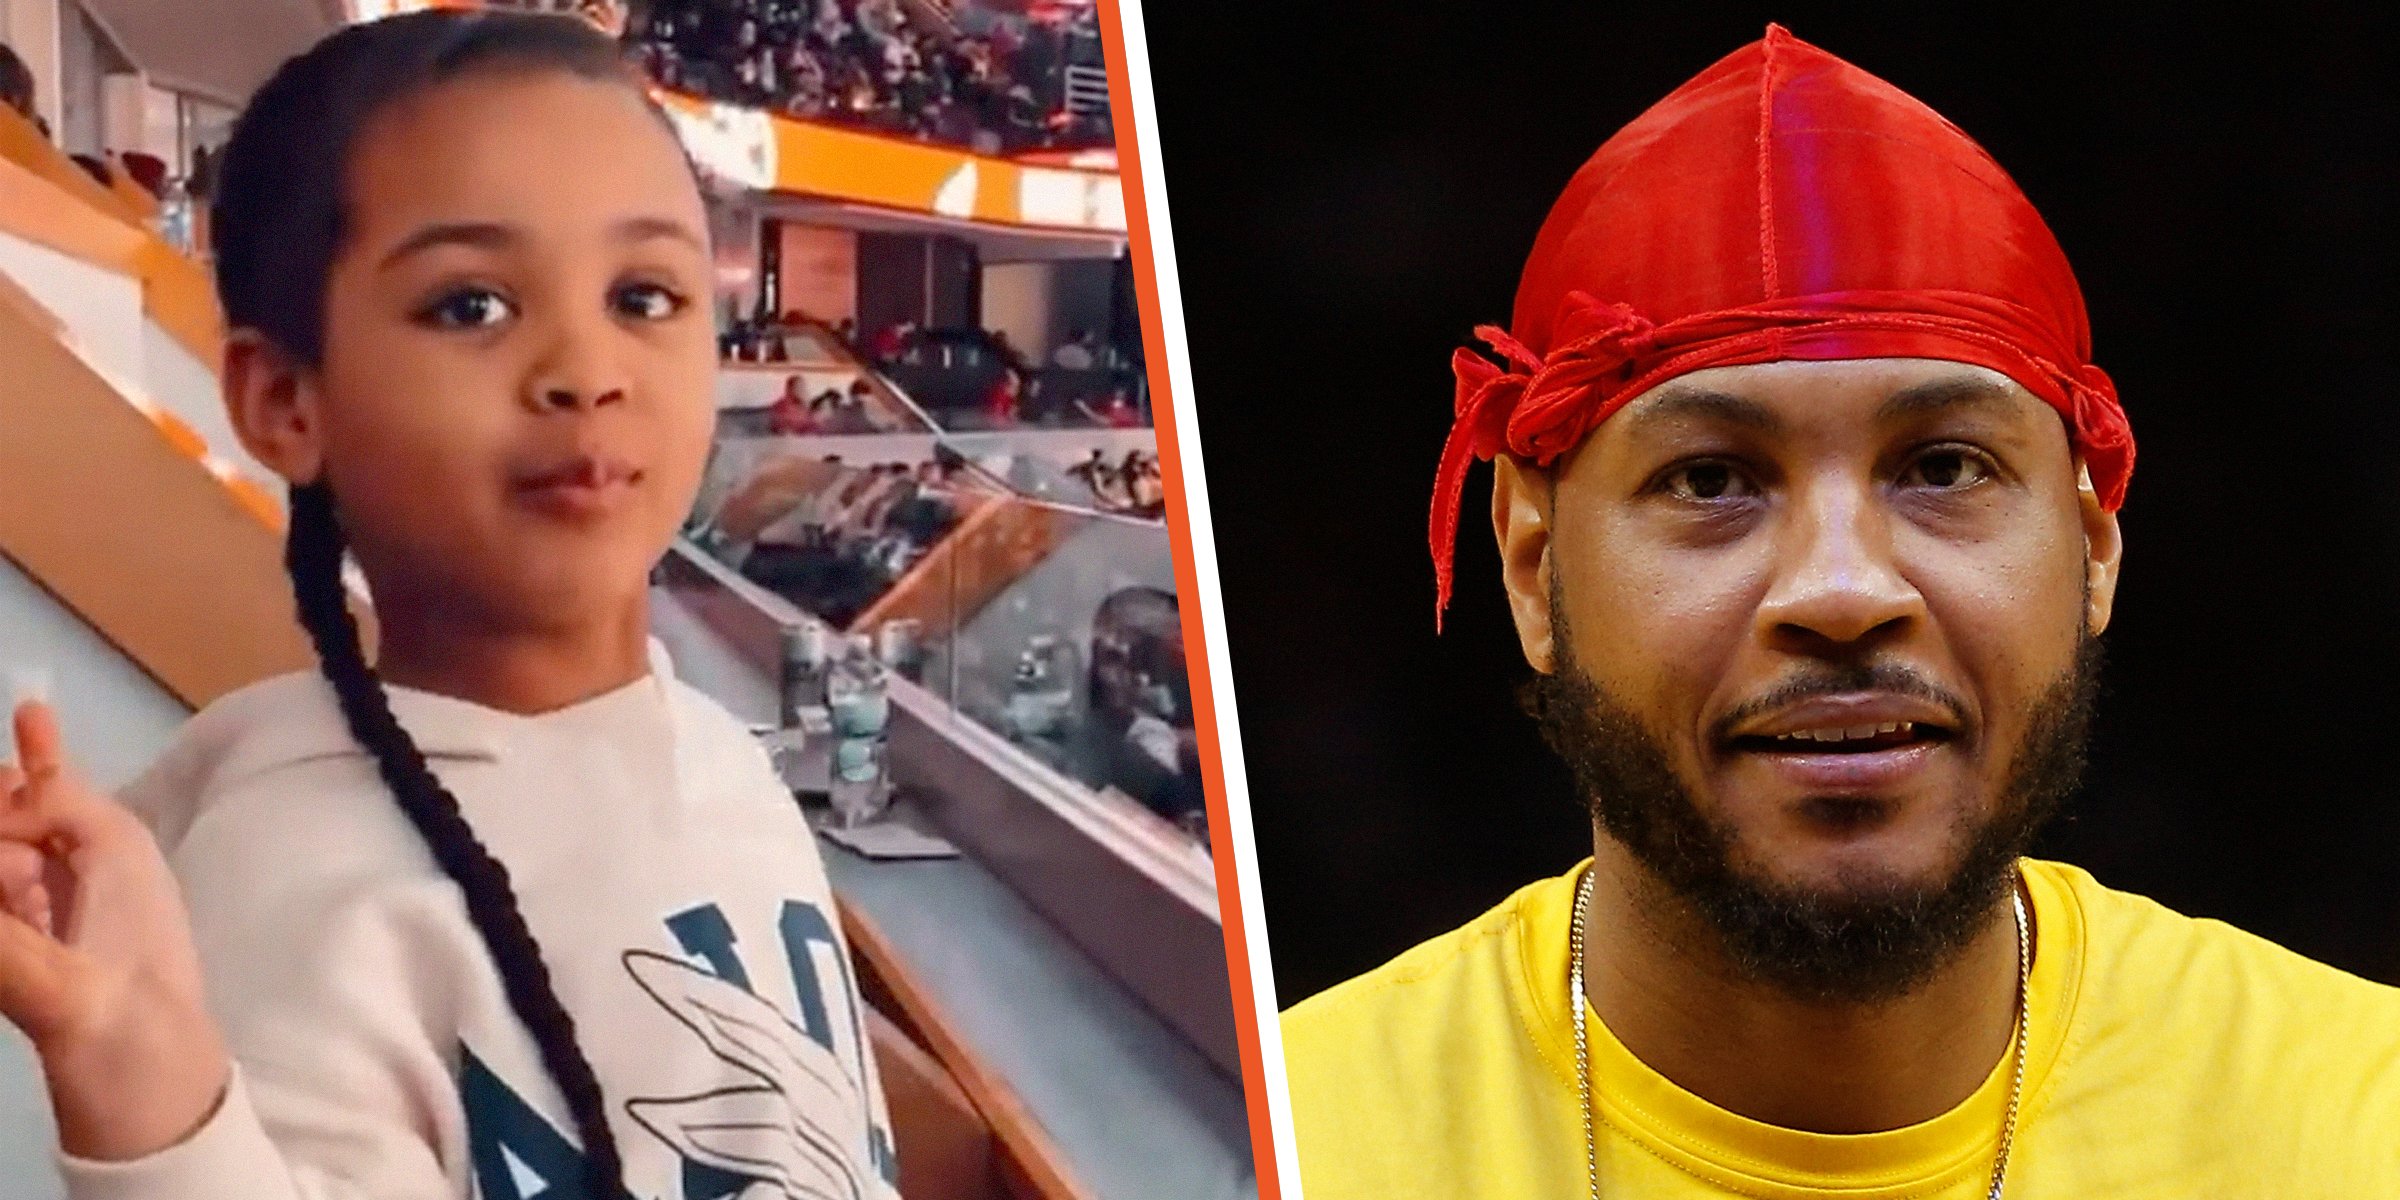 Carmelo Anthony's Alleged Daughter From Mistress Bears a Striking